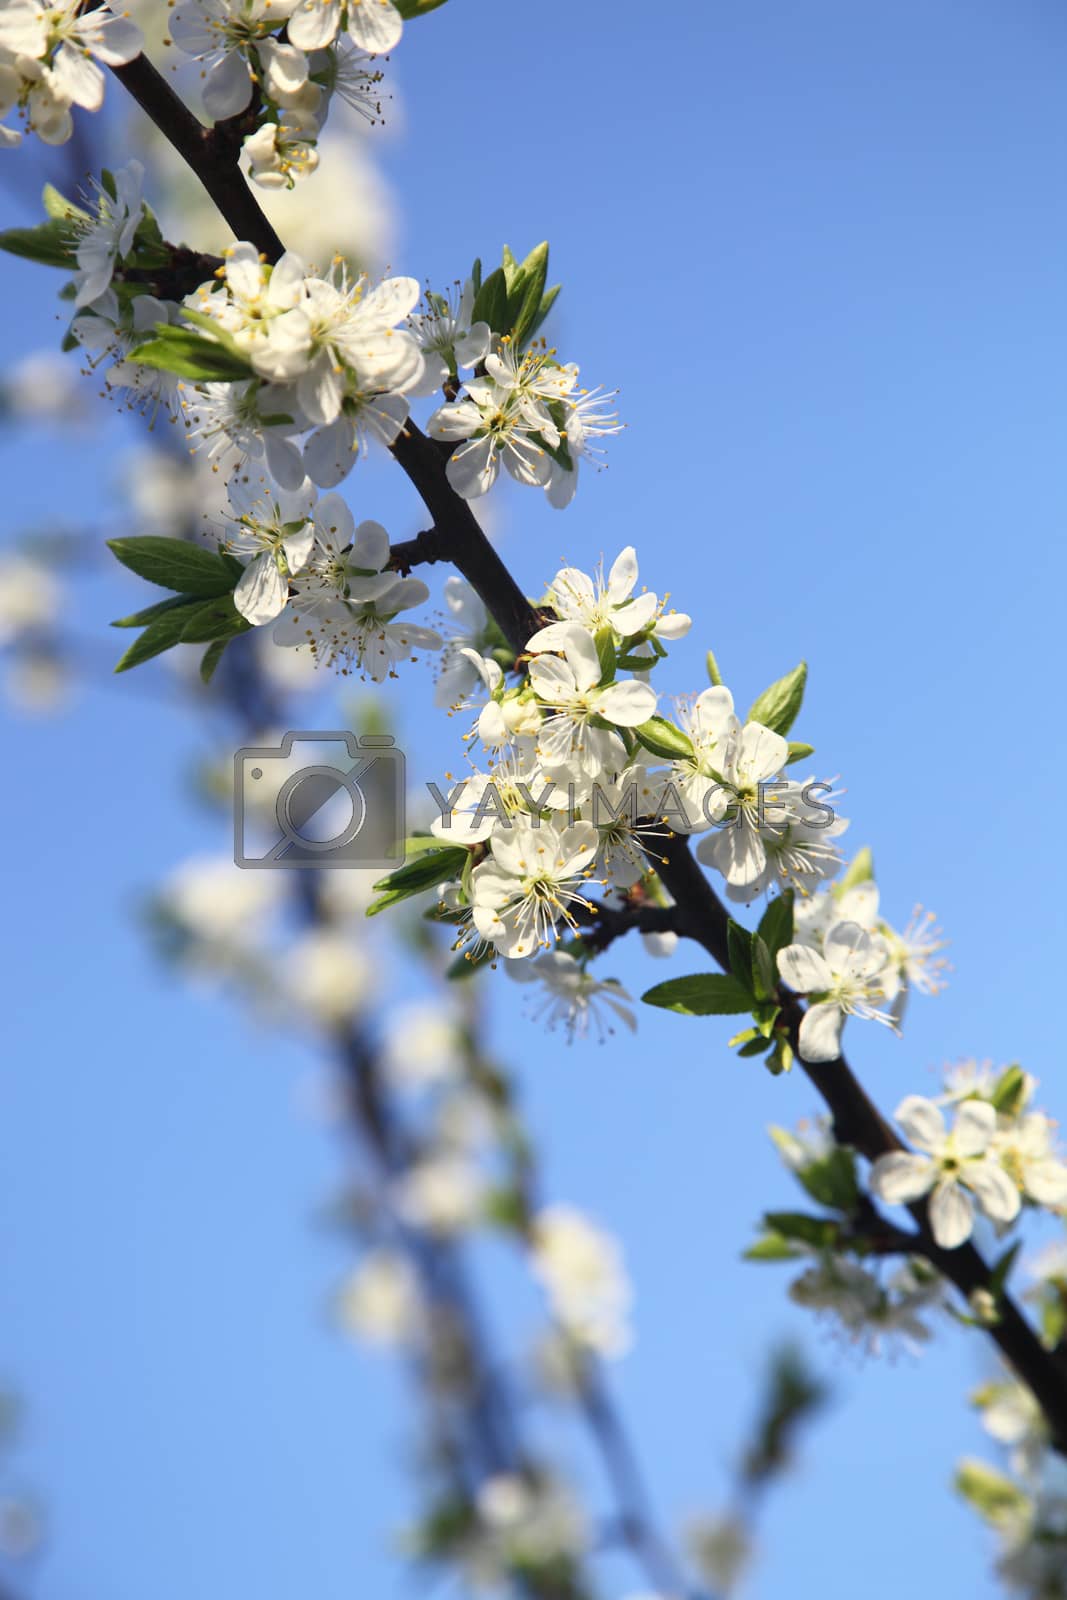 Royalty free image of blooming cherry by sagasan